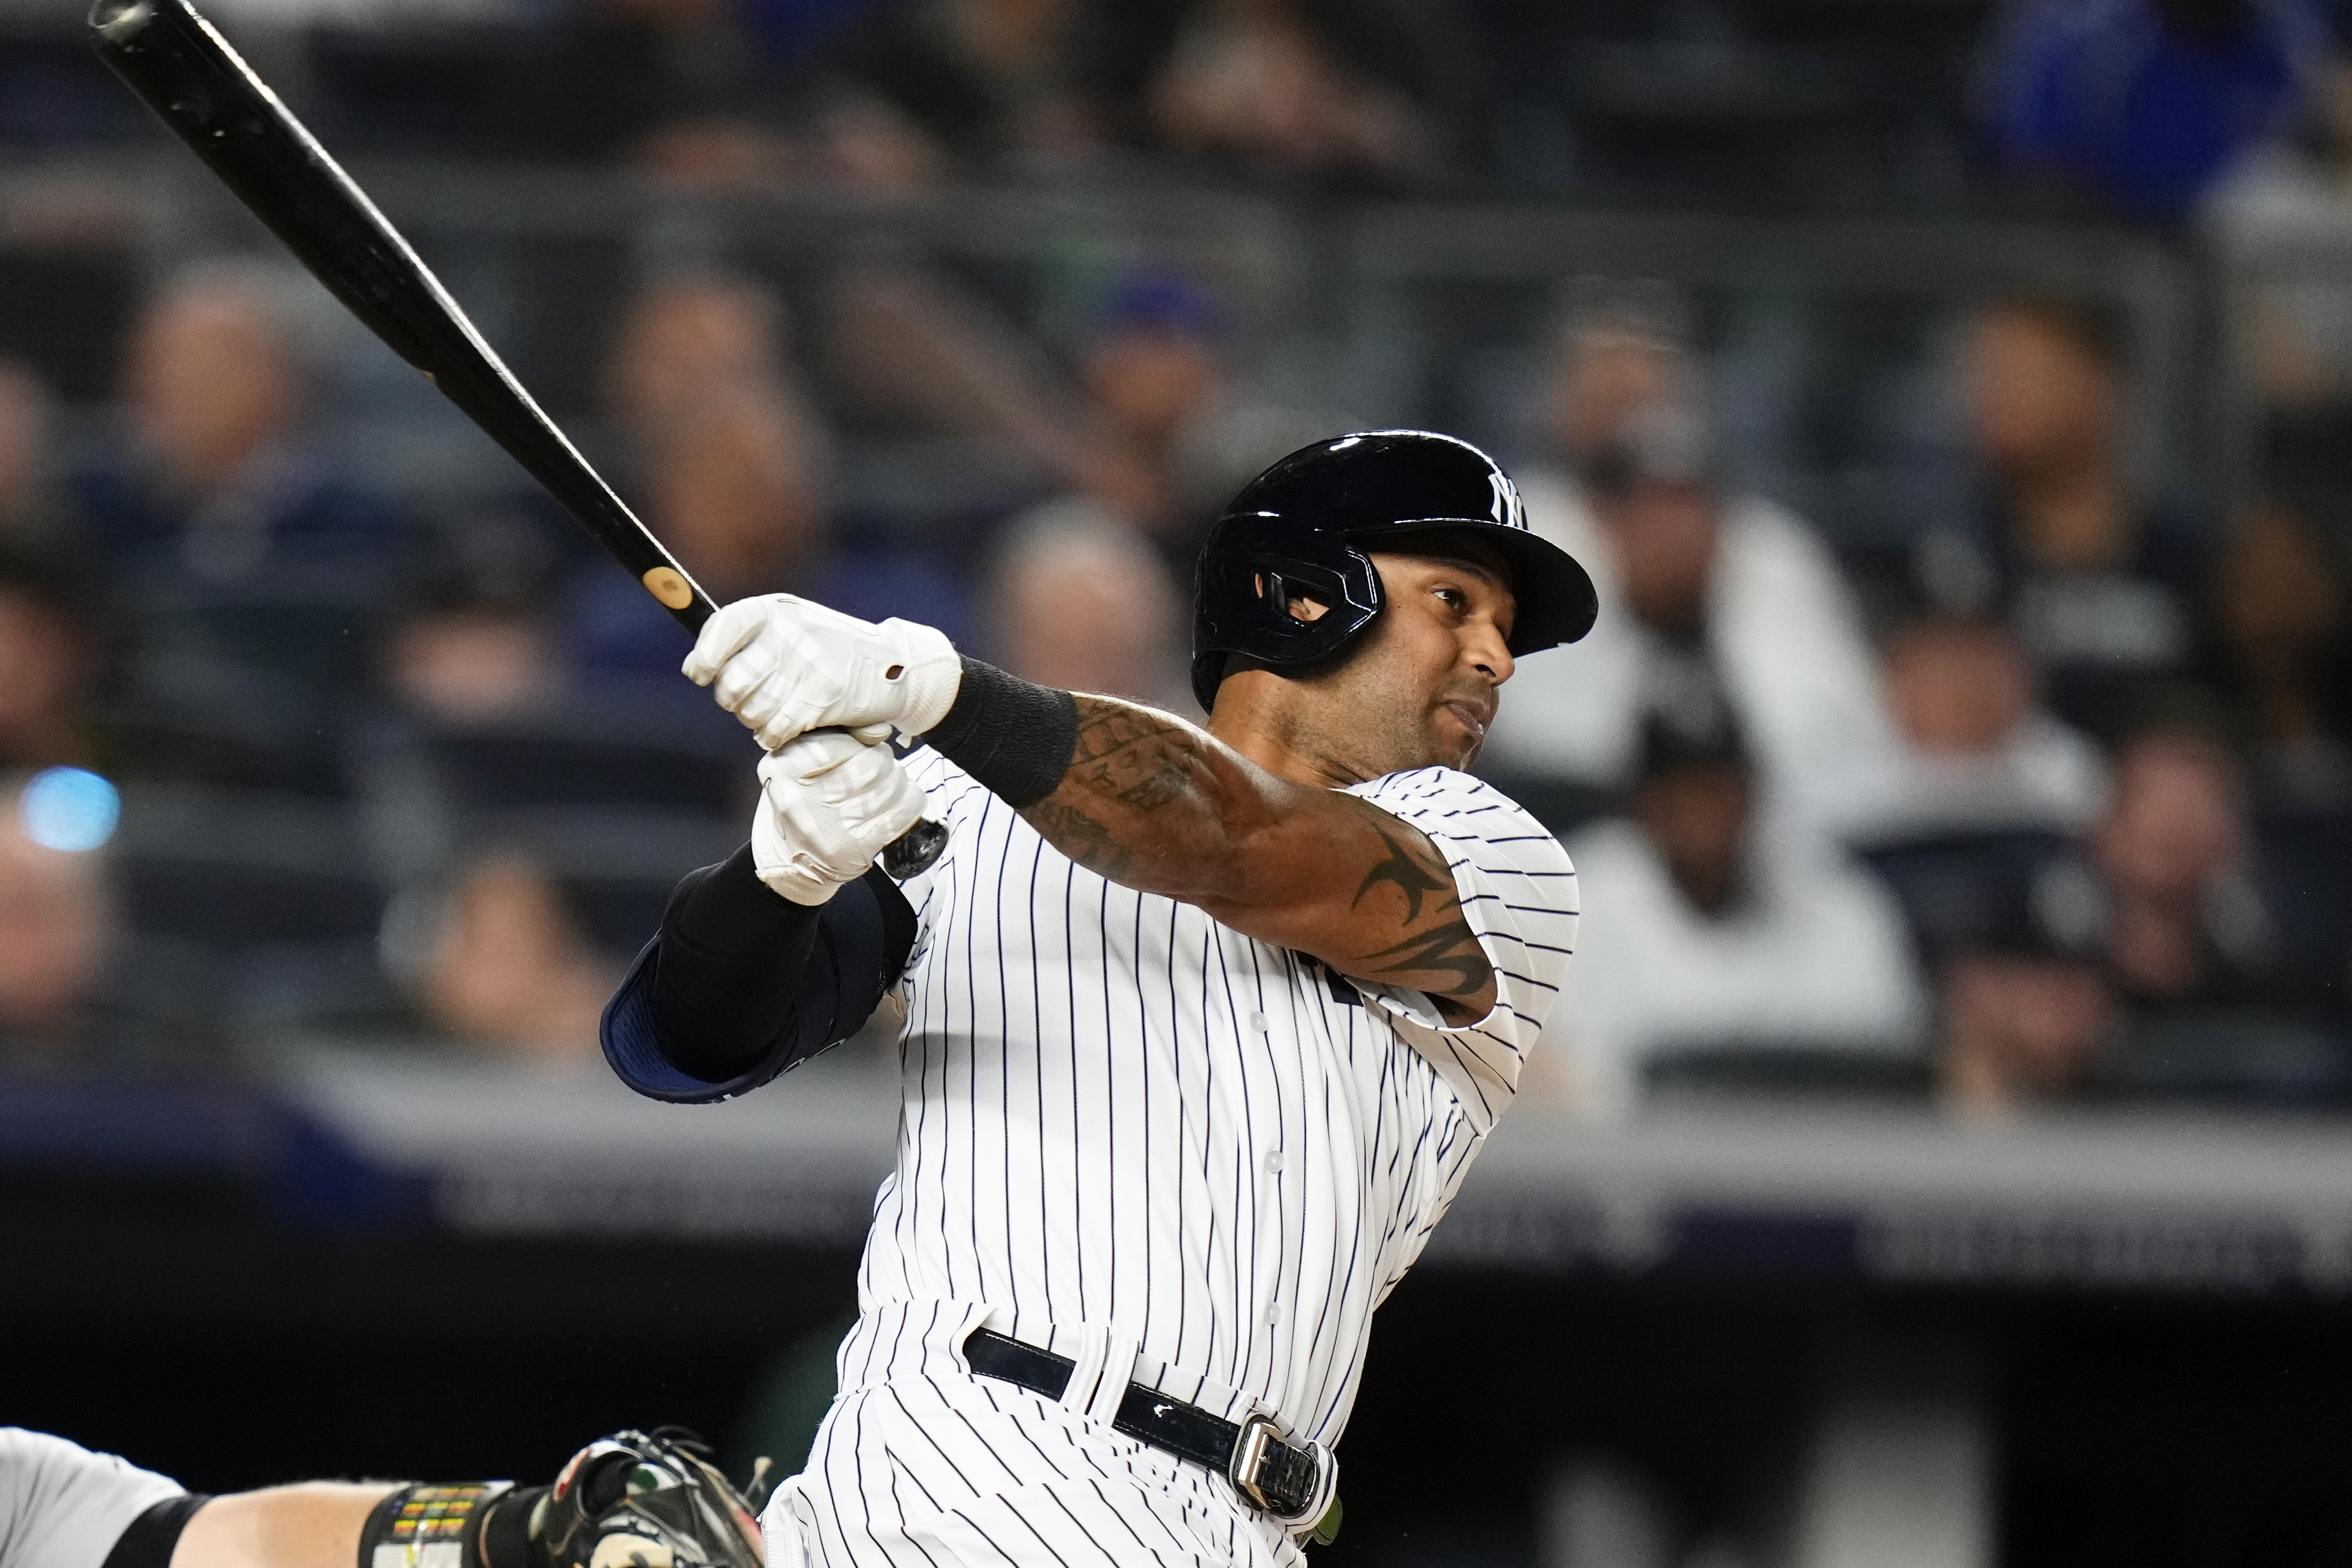 Aaron Hicks of the New York Yankees hits a two-run home run in the seventh inning of a game against the Oakland Athletics Monday, May 8, 2023. (AP Photo/Frank Franklin II)